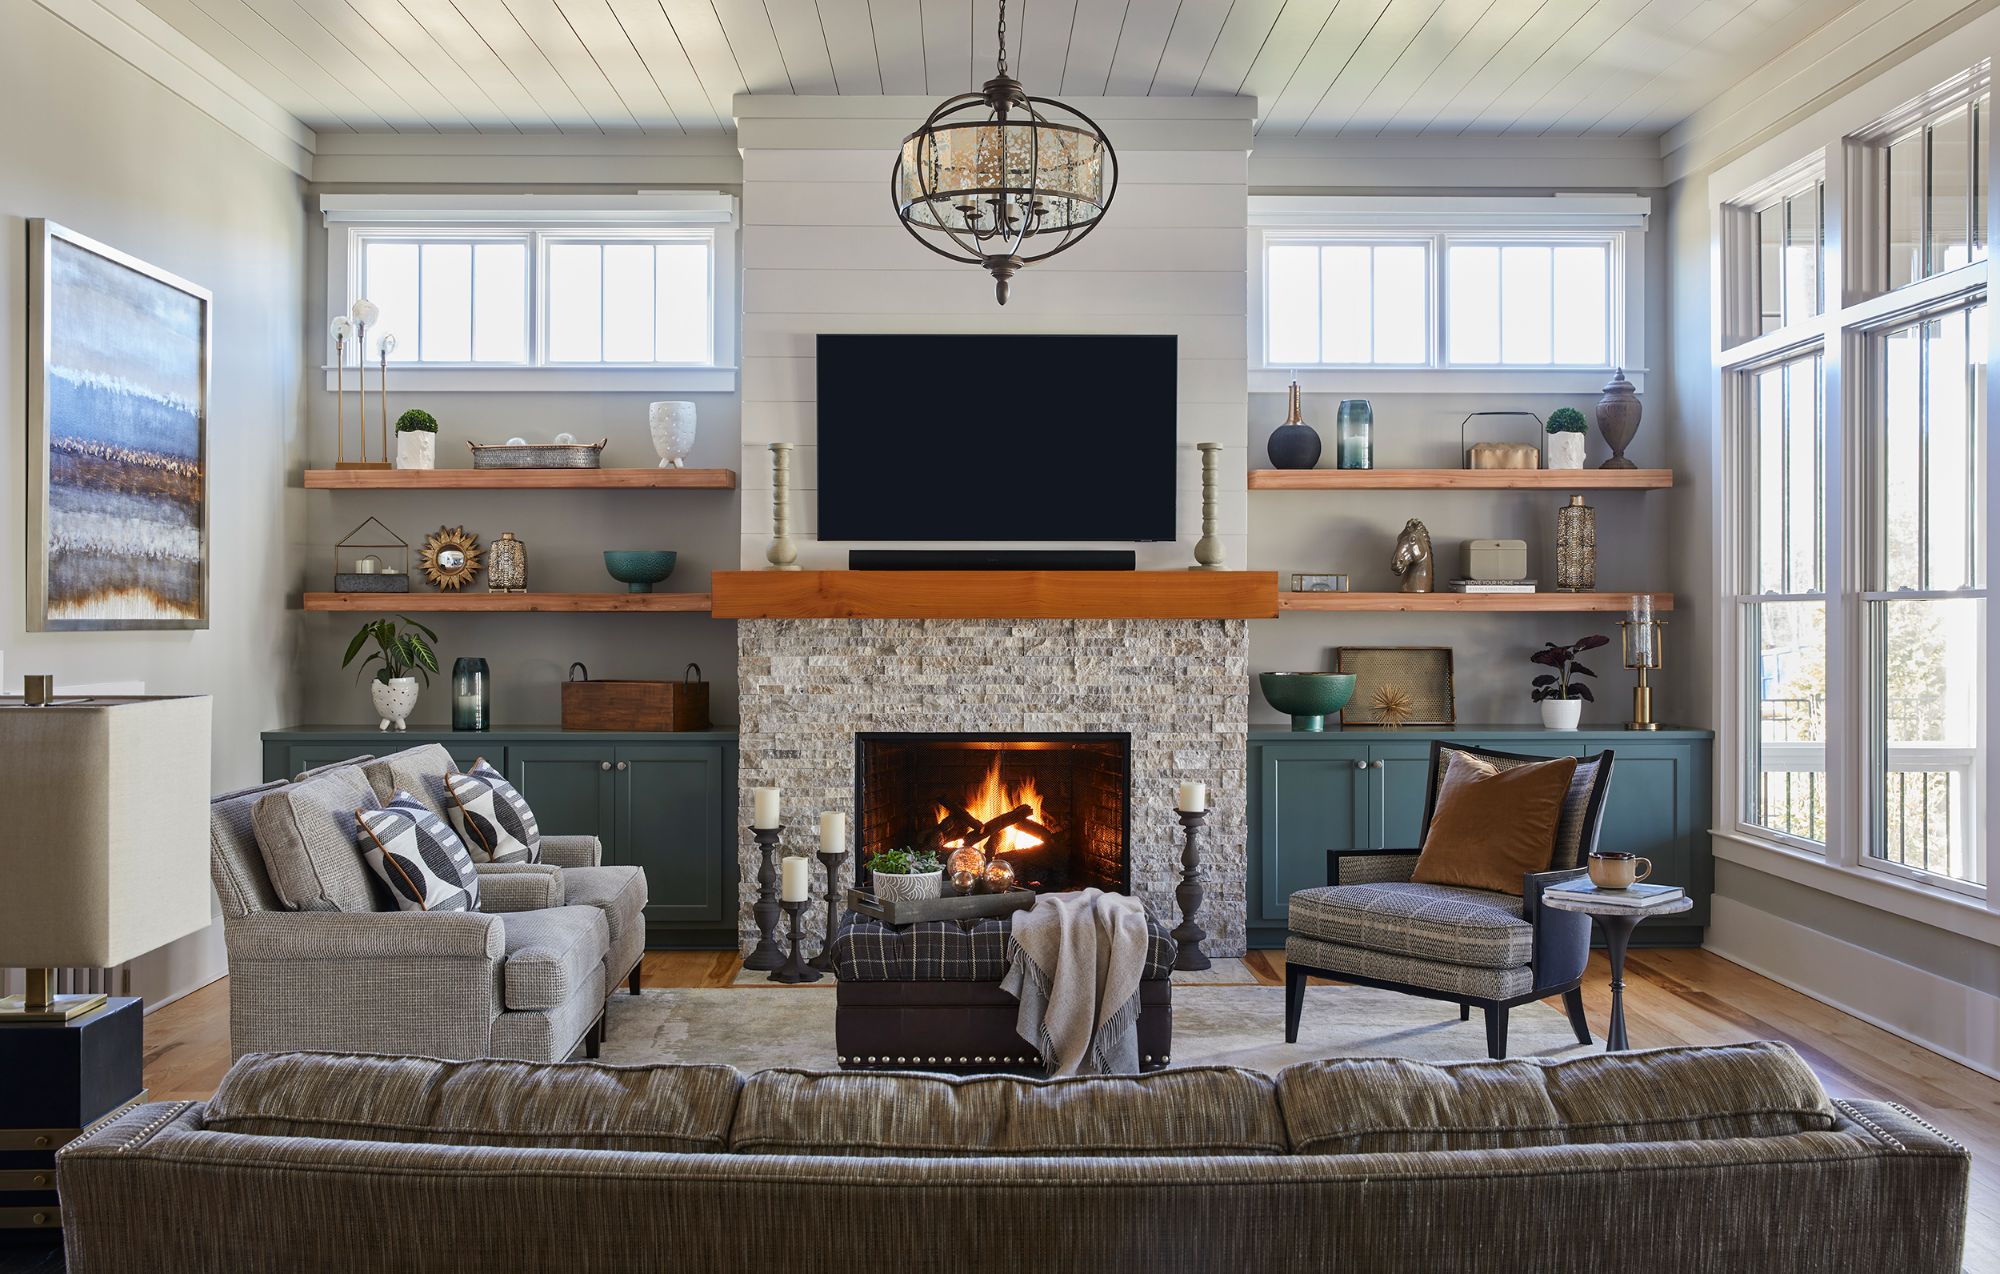 How to Incorporate Rustic Design Style in Your Home